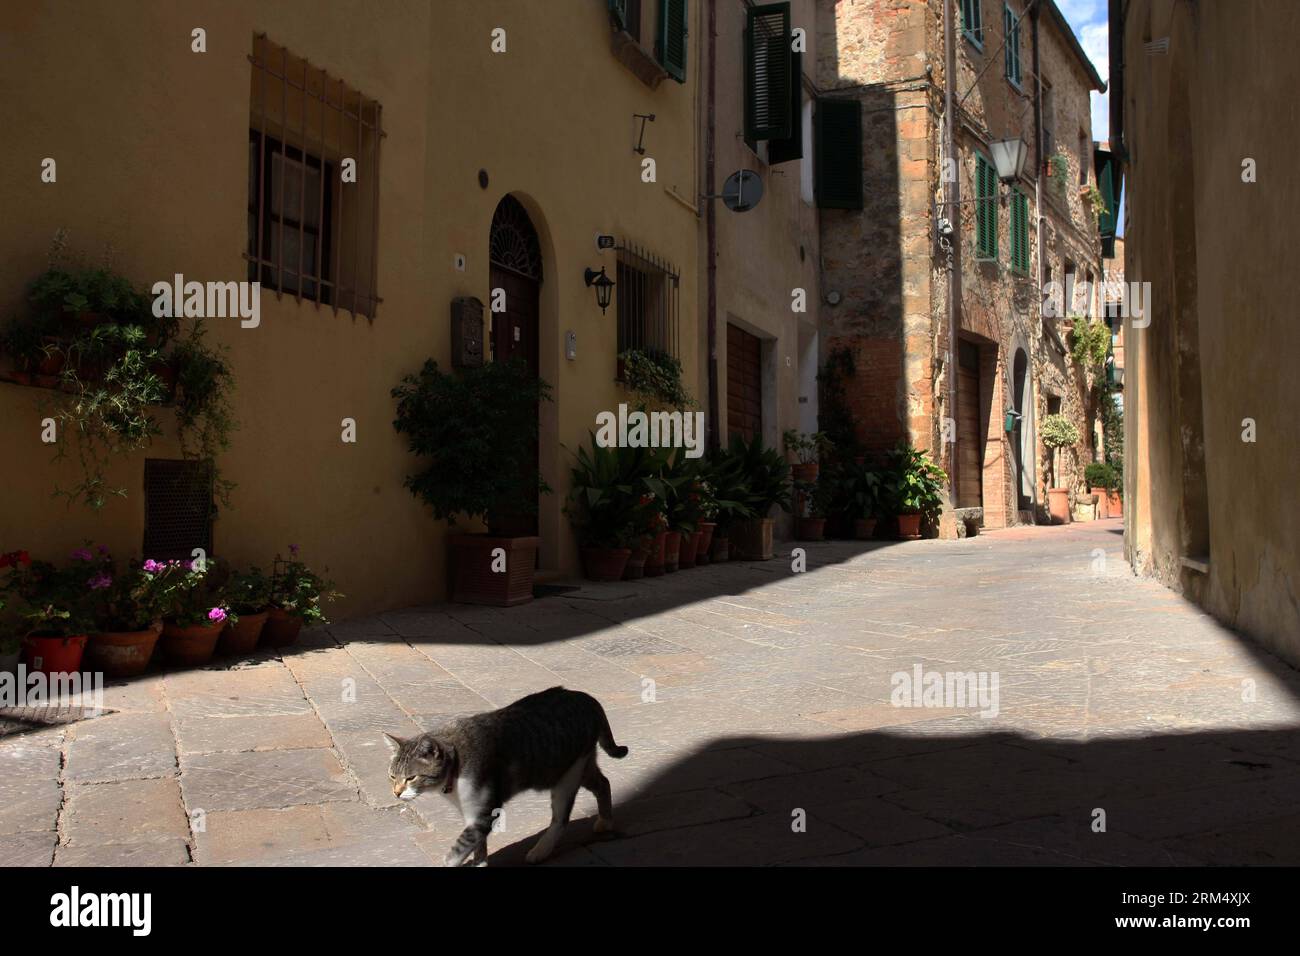 Bildnummer: 60528700  Datum: 25.09.2013  Copyright: imago/Xinhua A cat walks past a street in the historic center of Pienza, Italy, Sept. 25, 2013. It was in this Tuscan town that Renaissance town-planning concepts were first put into practice after Pope Pius II decided, in 1459, to transform the look of his birthplace. He chose the architect Bernardo Rossellino, who applied the principles of his mentor, Leon Battista Alberti. This new vision of urban space was realized in the superb square known as Piazza Pio II and the buildings around it: the Piccolomini Palace, the Borgia Palace and the ca Stock Photo